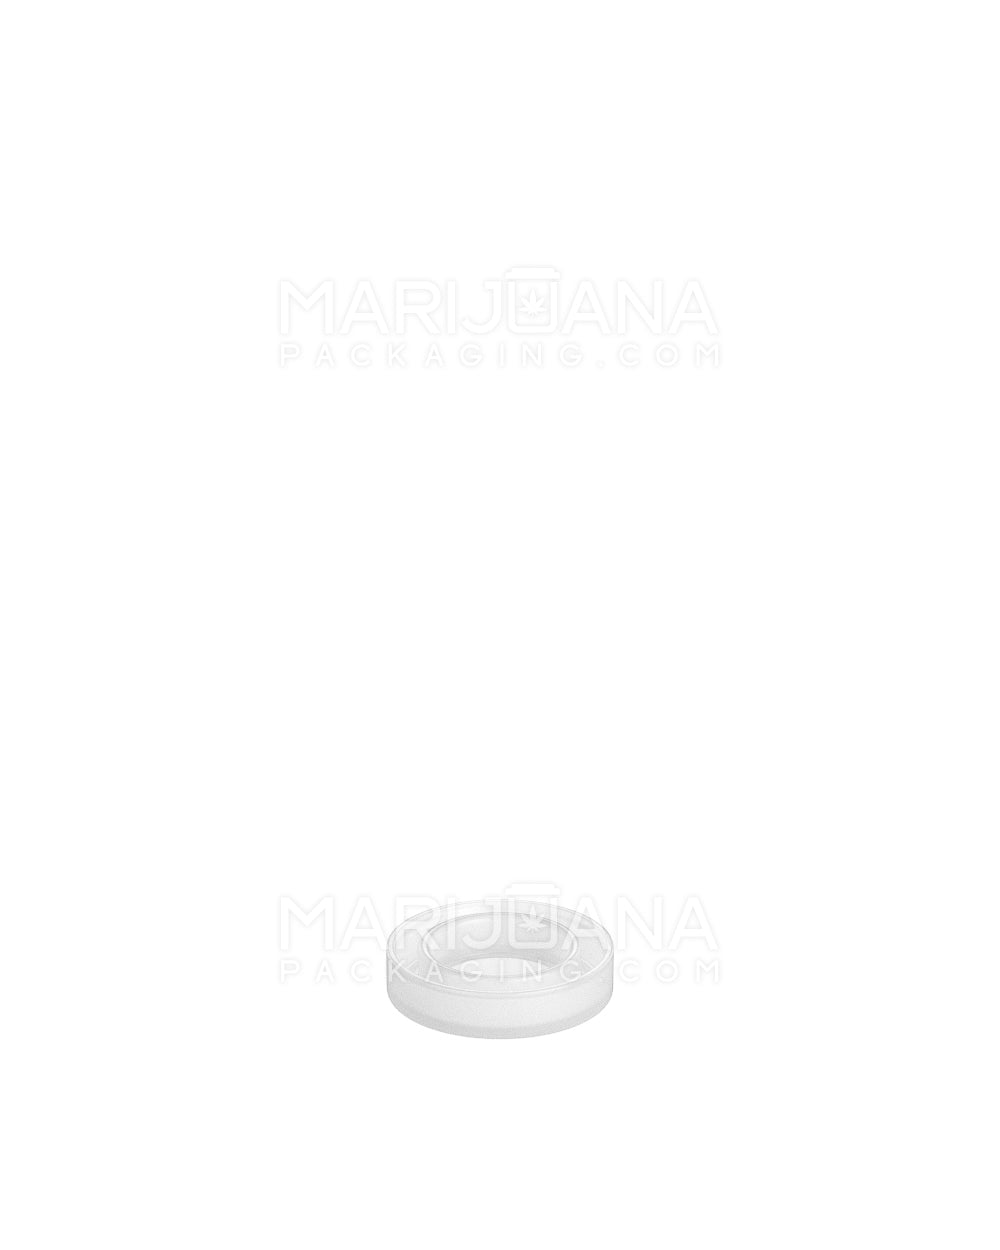 Clear Glass Concentrate Jar w/ Clear Cap | 25mm - 6mL - 1008 Count - 6